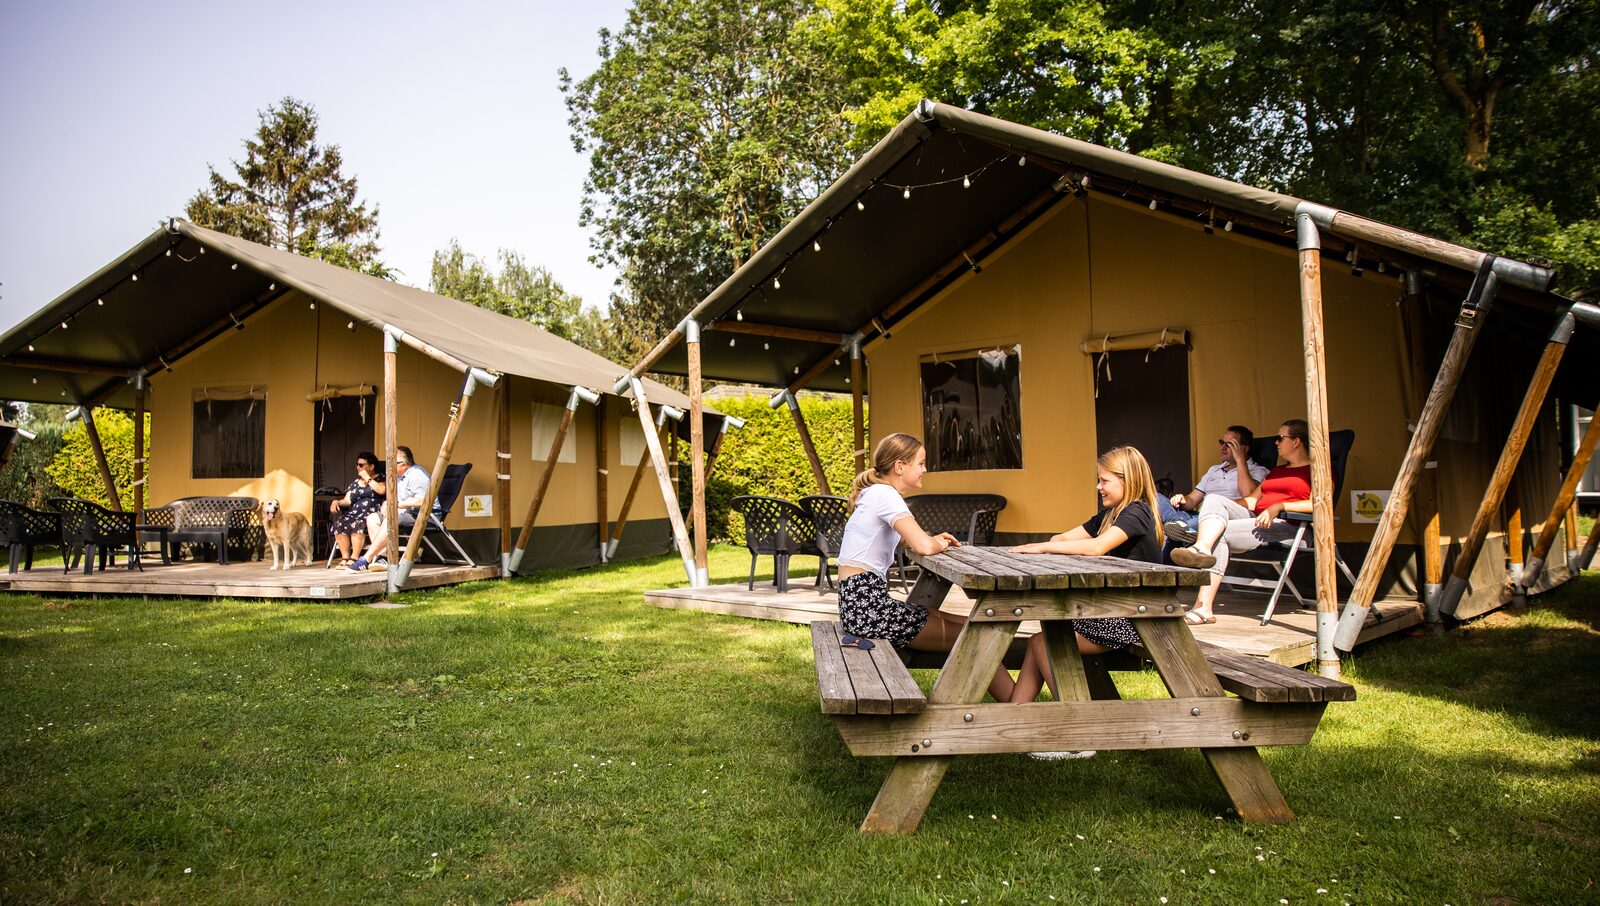 Enoy a glamping experience